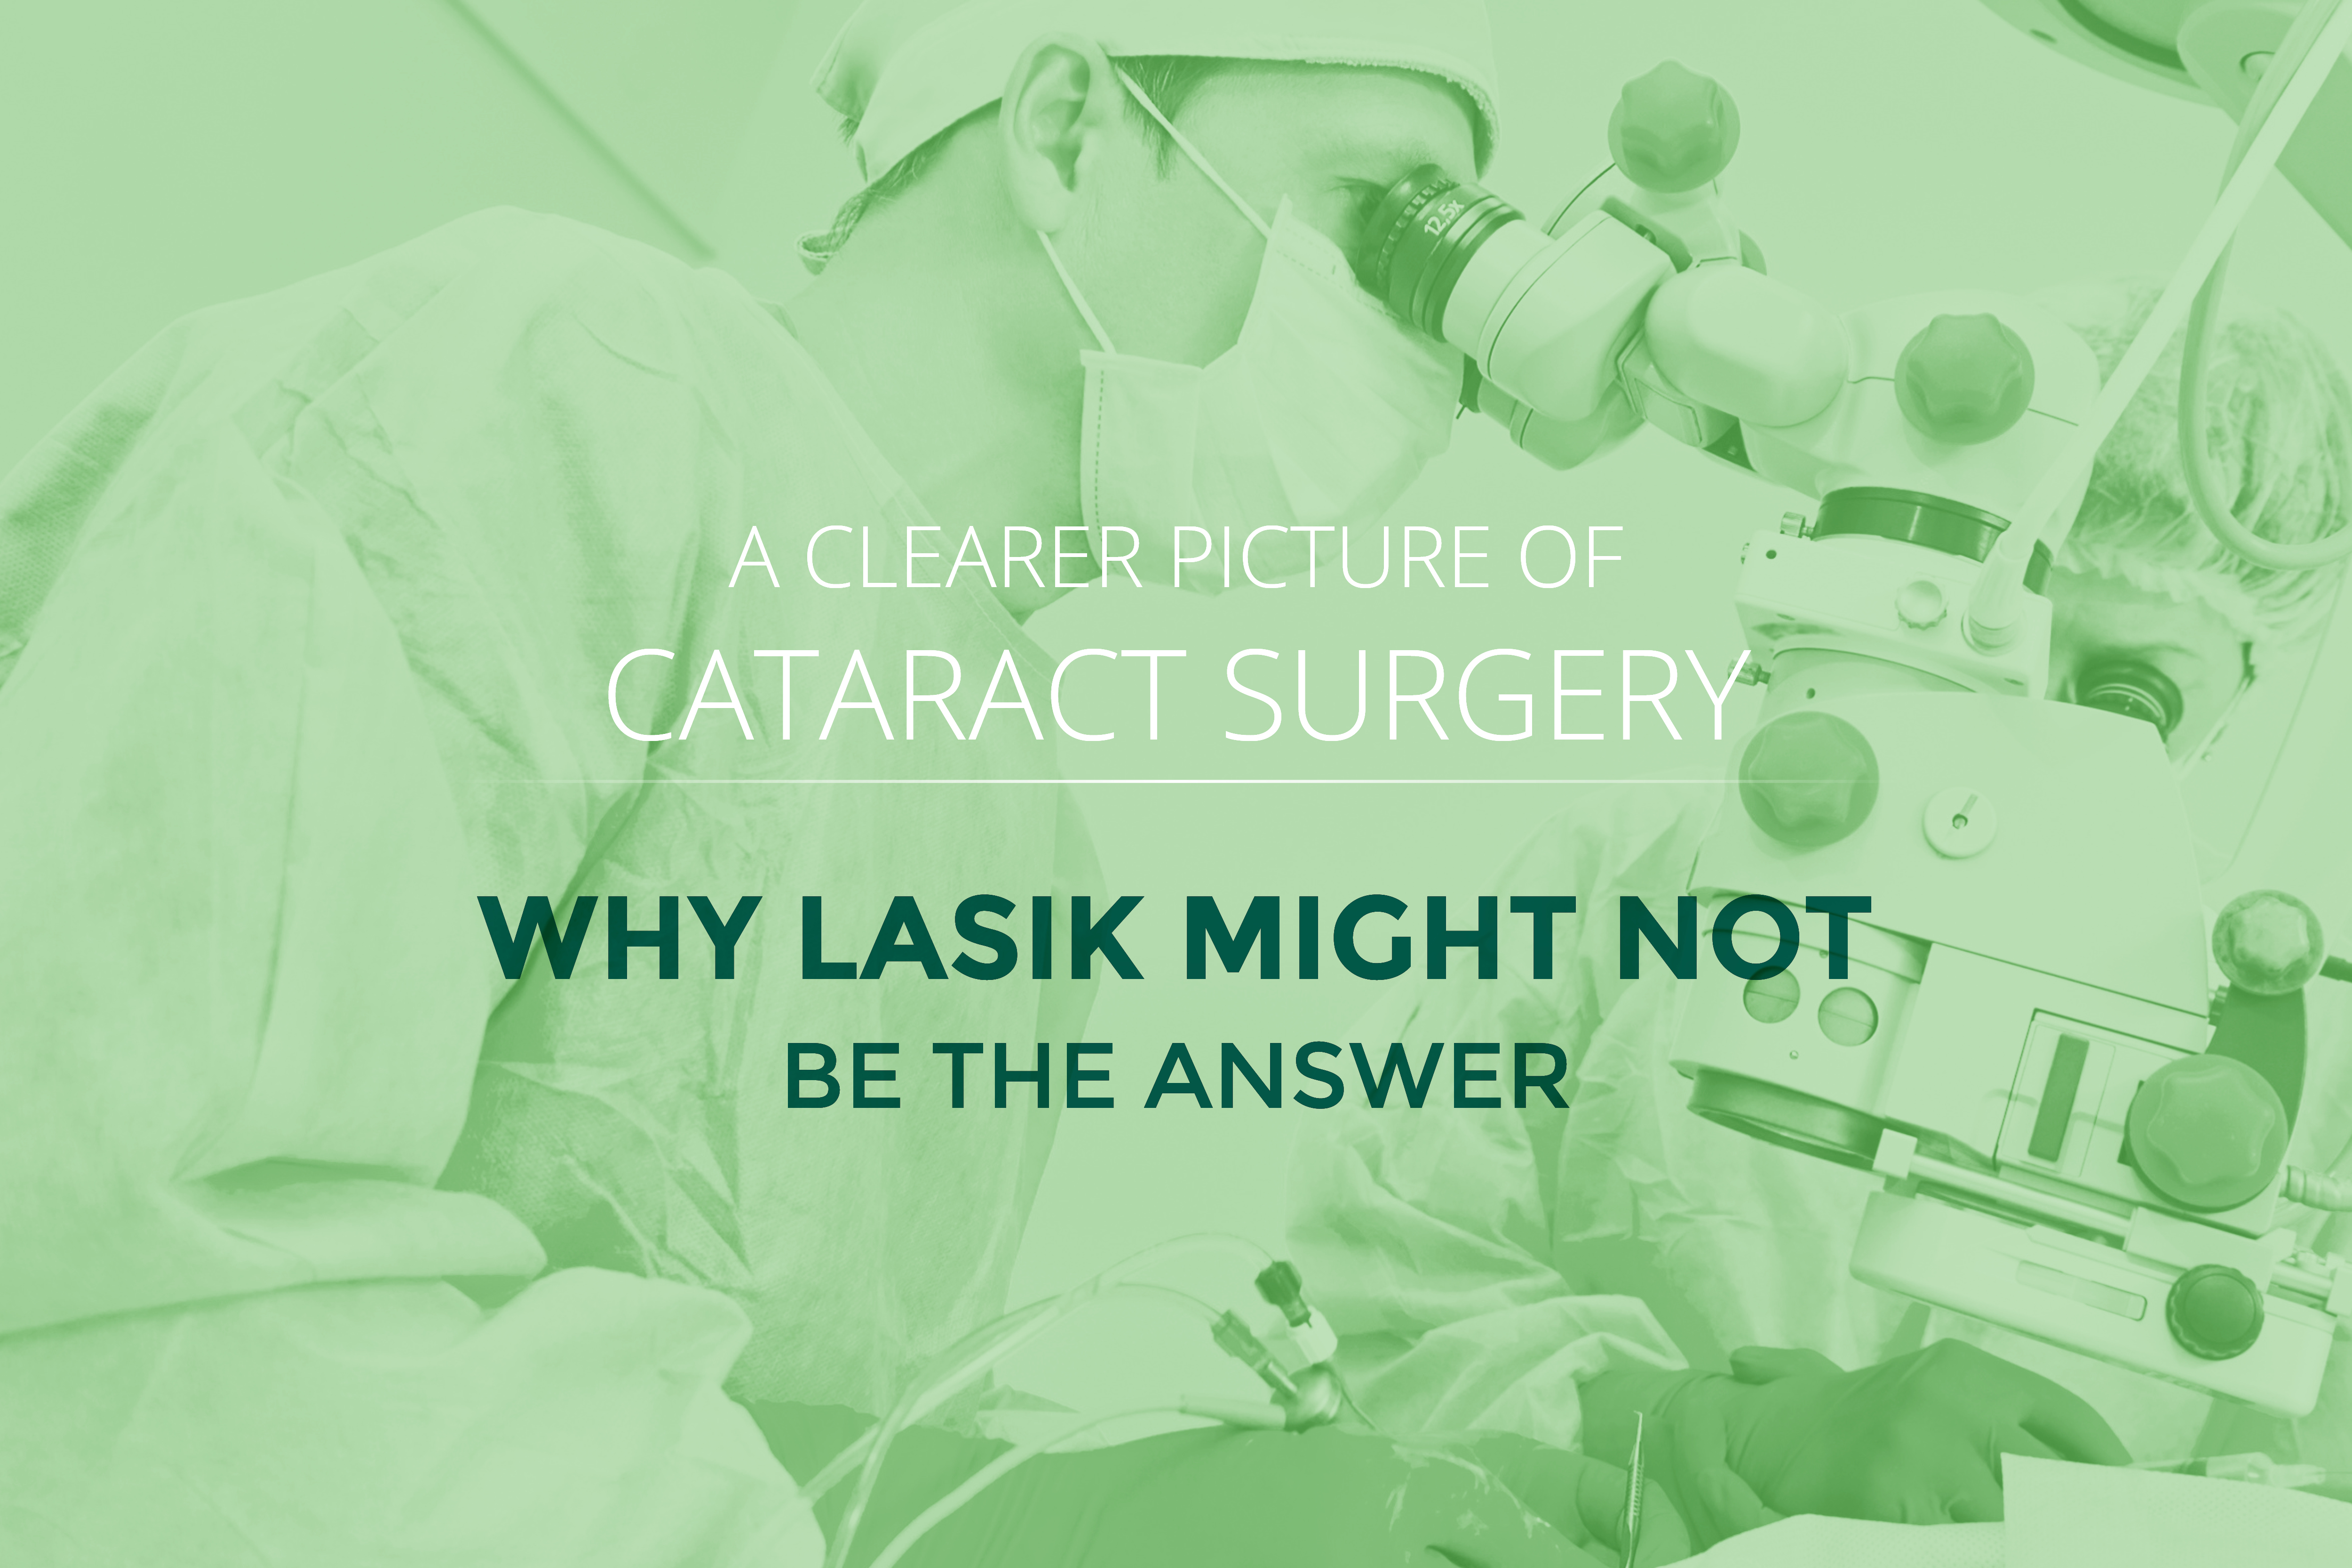 Cataract Surgery: Why Lasik Might not be the Answer